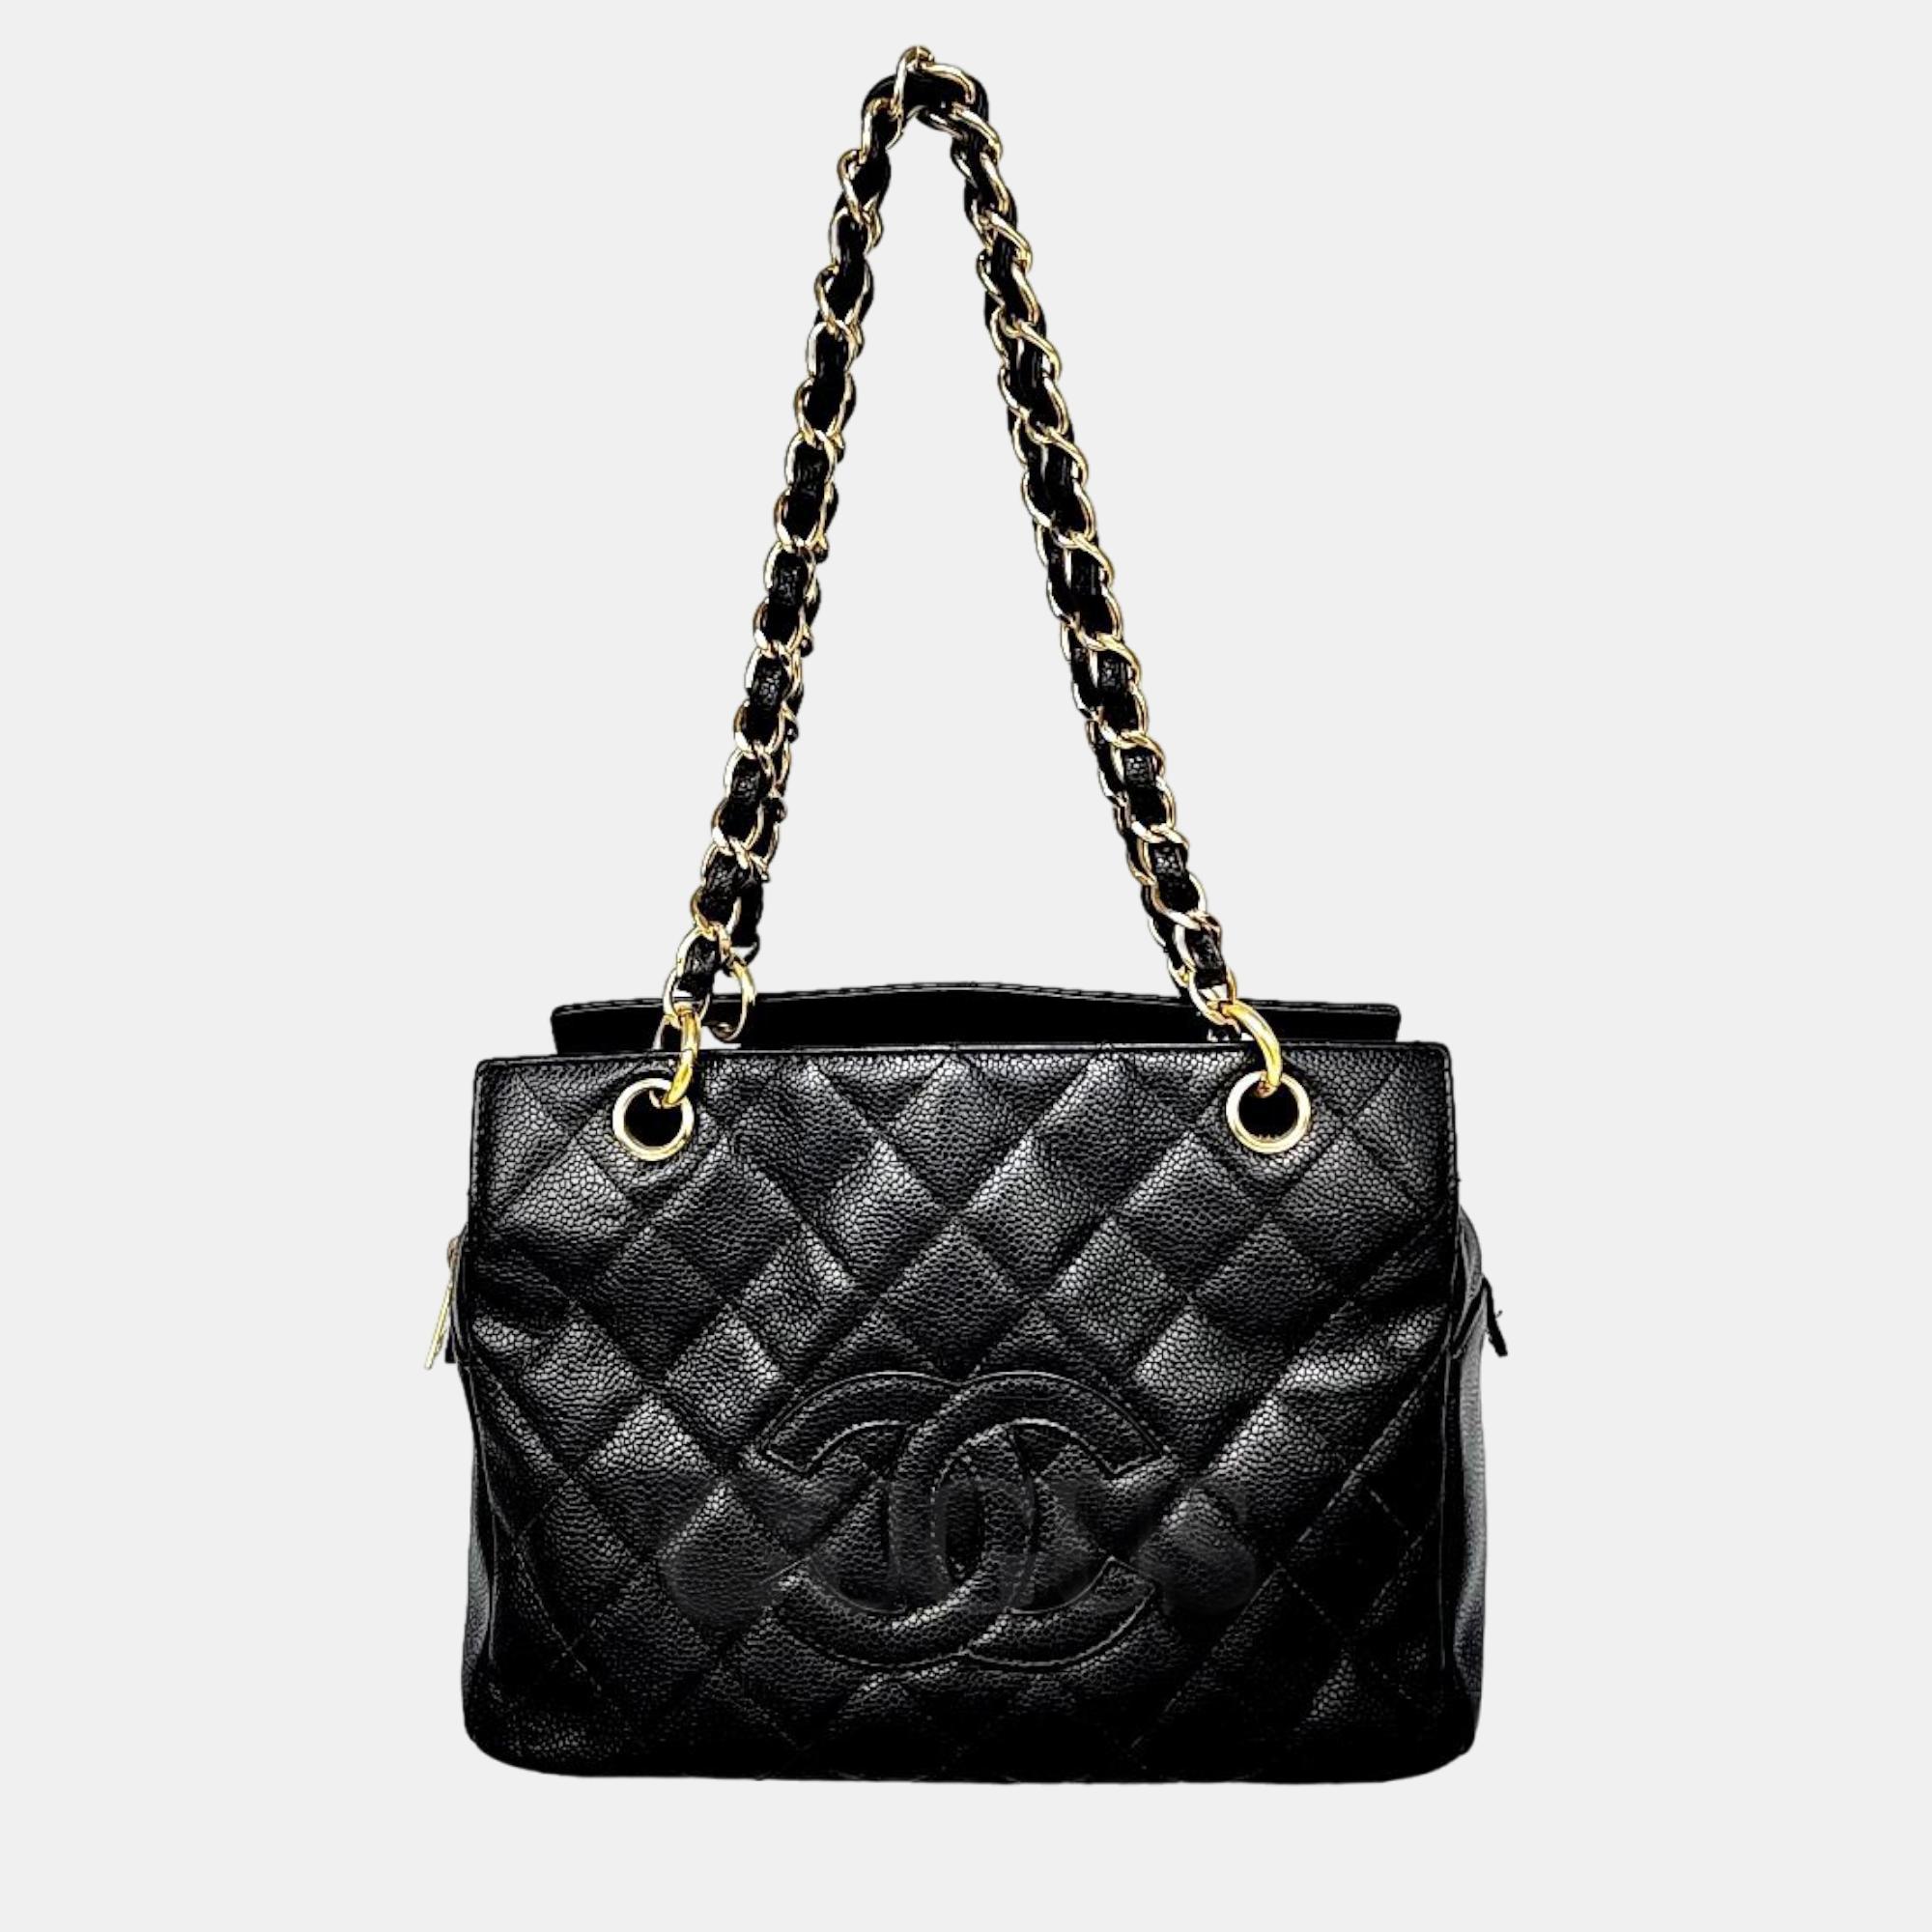 Pre-owned Chanel Black Caviar Leather Cc Timeless Tote Bag